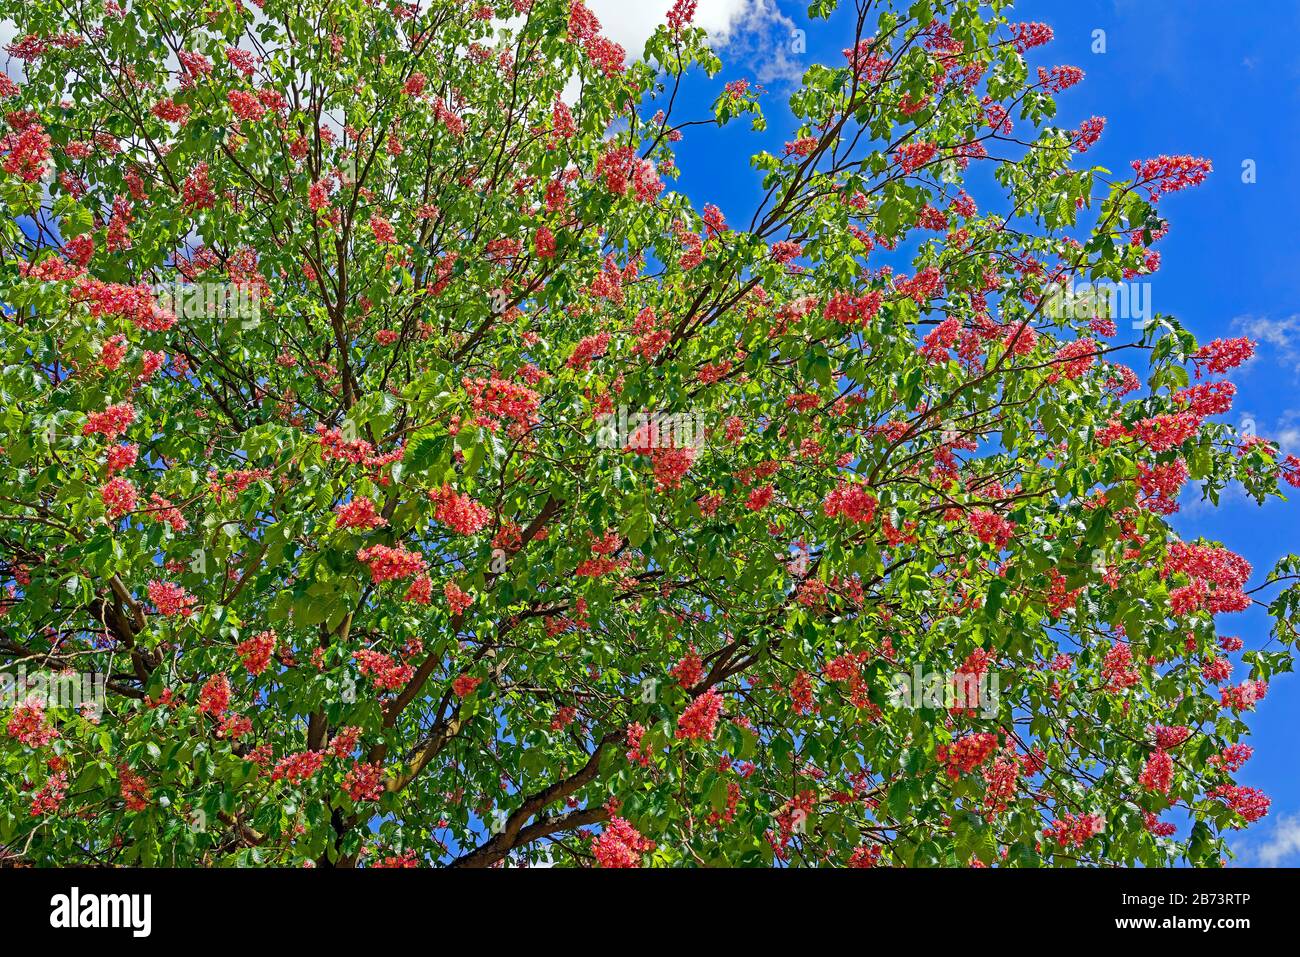 Germany, Rhineland-Palatinate, Speyer, Rhine avenue, SchUM town, chestnut trees, blossoms, red, plants, trees, detail, flowers Stock Photo